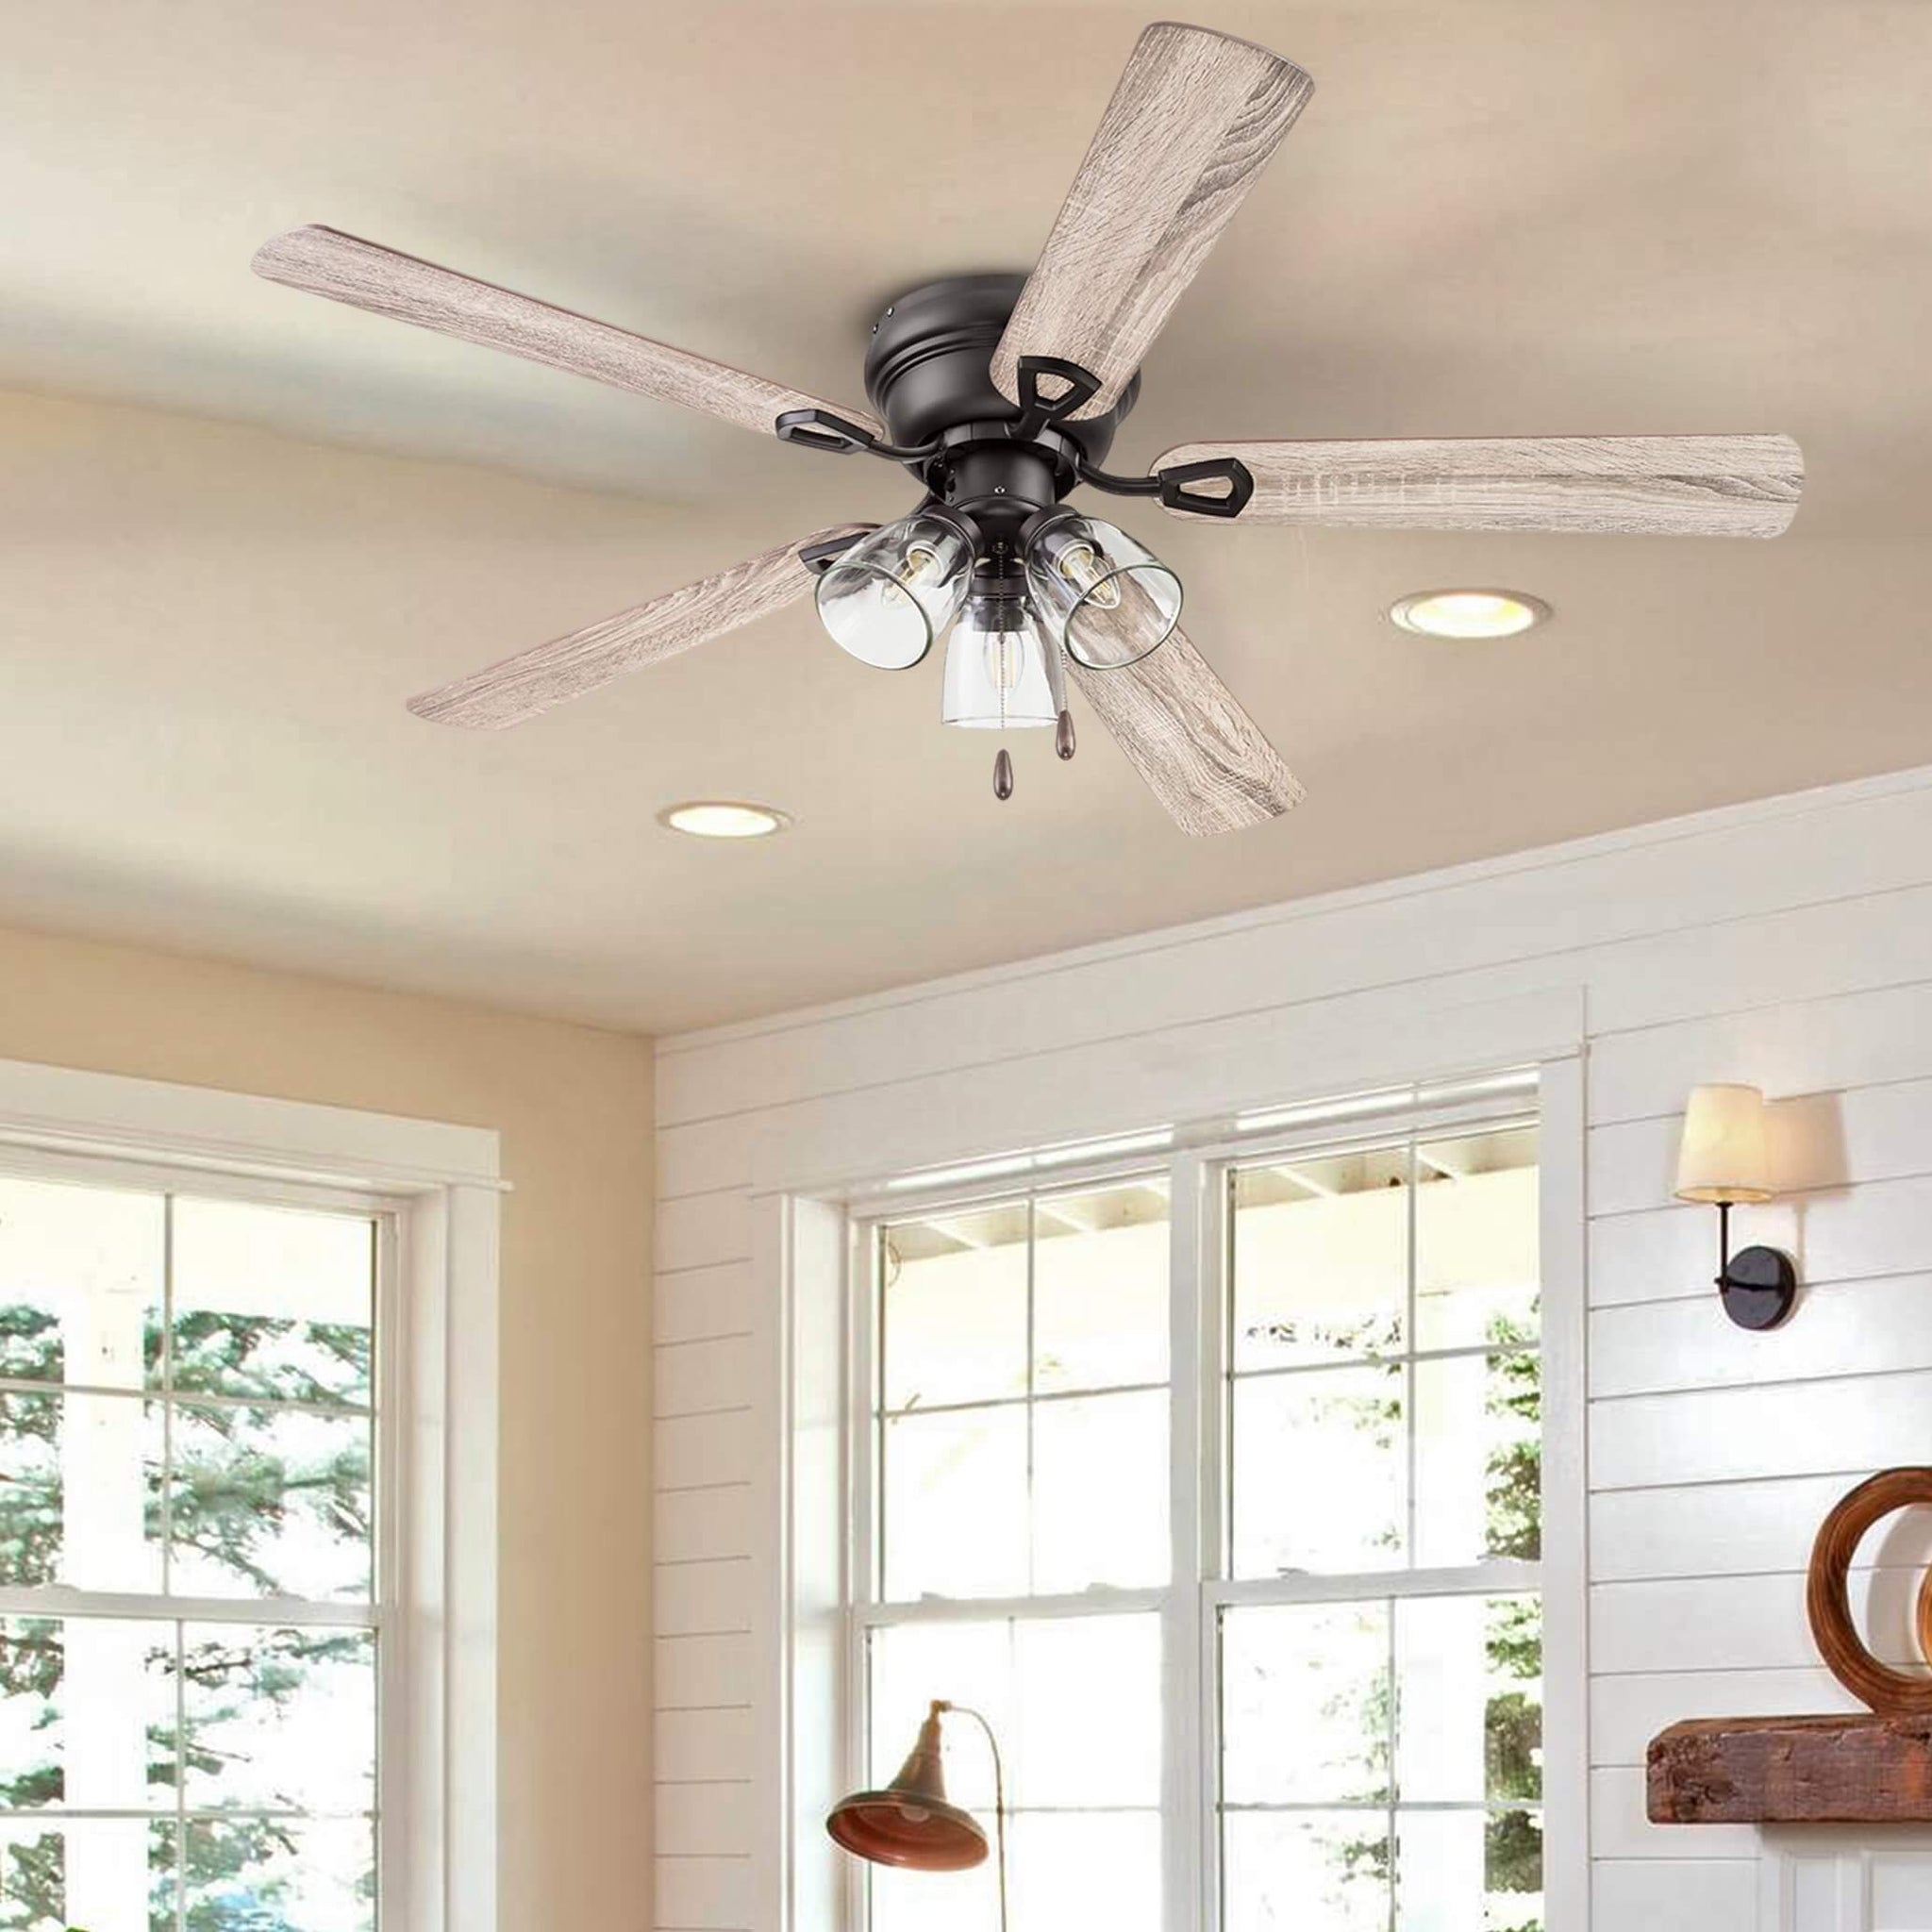 52 Inch Renton, Espresso Bronze, Pull Chain, Ceiling Fan by Prominence Home